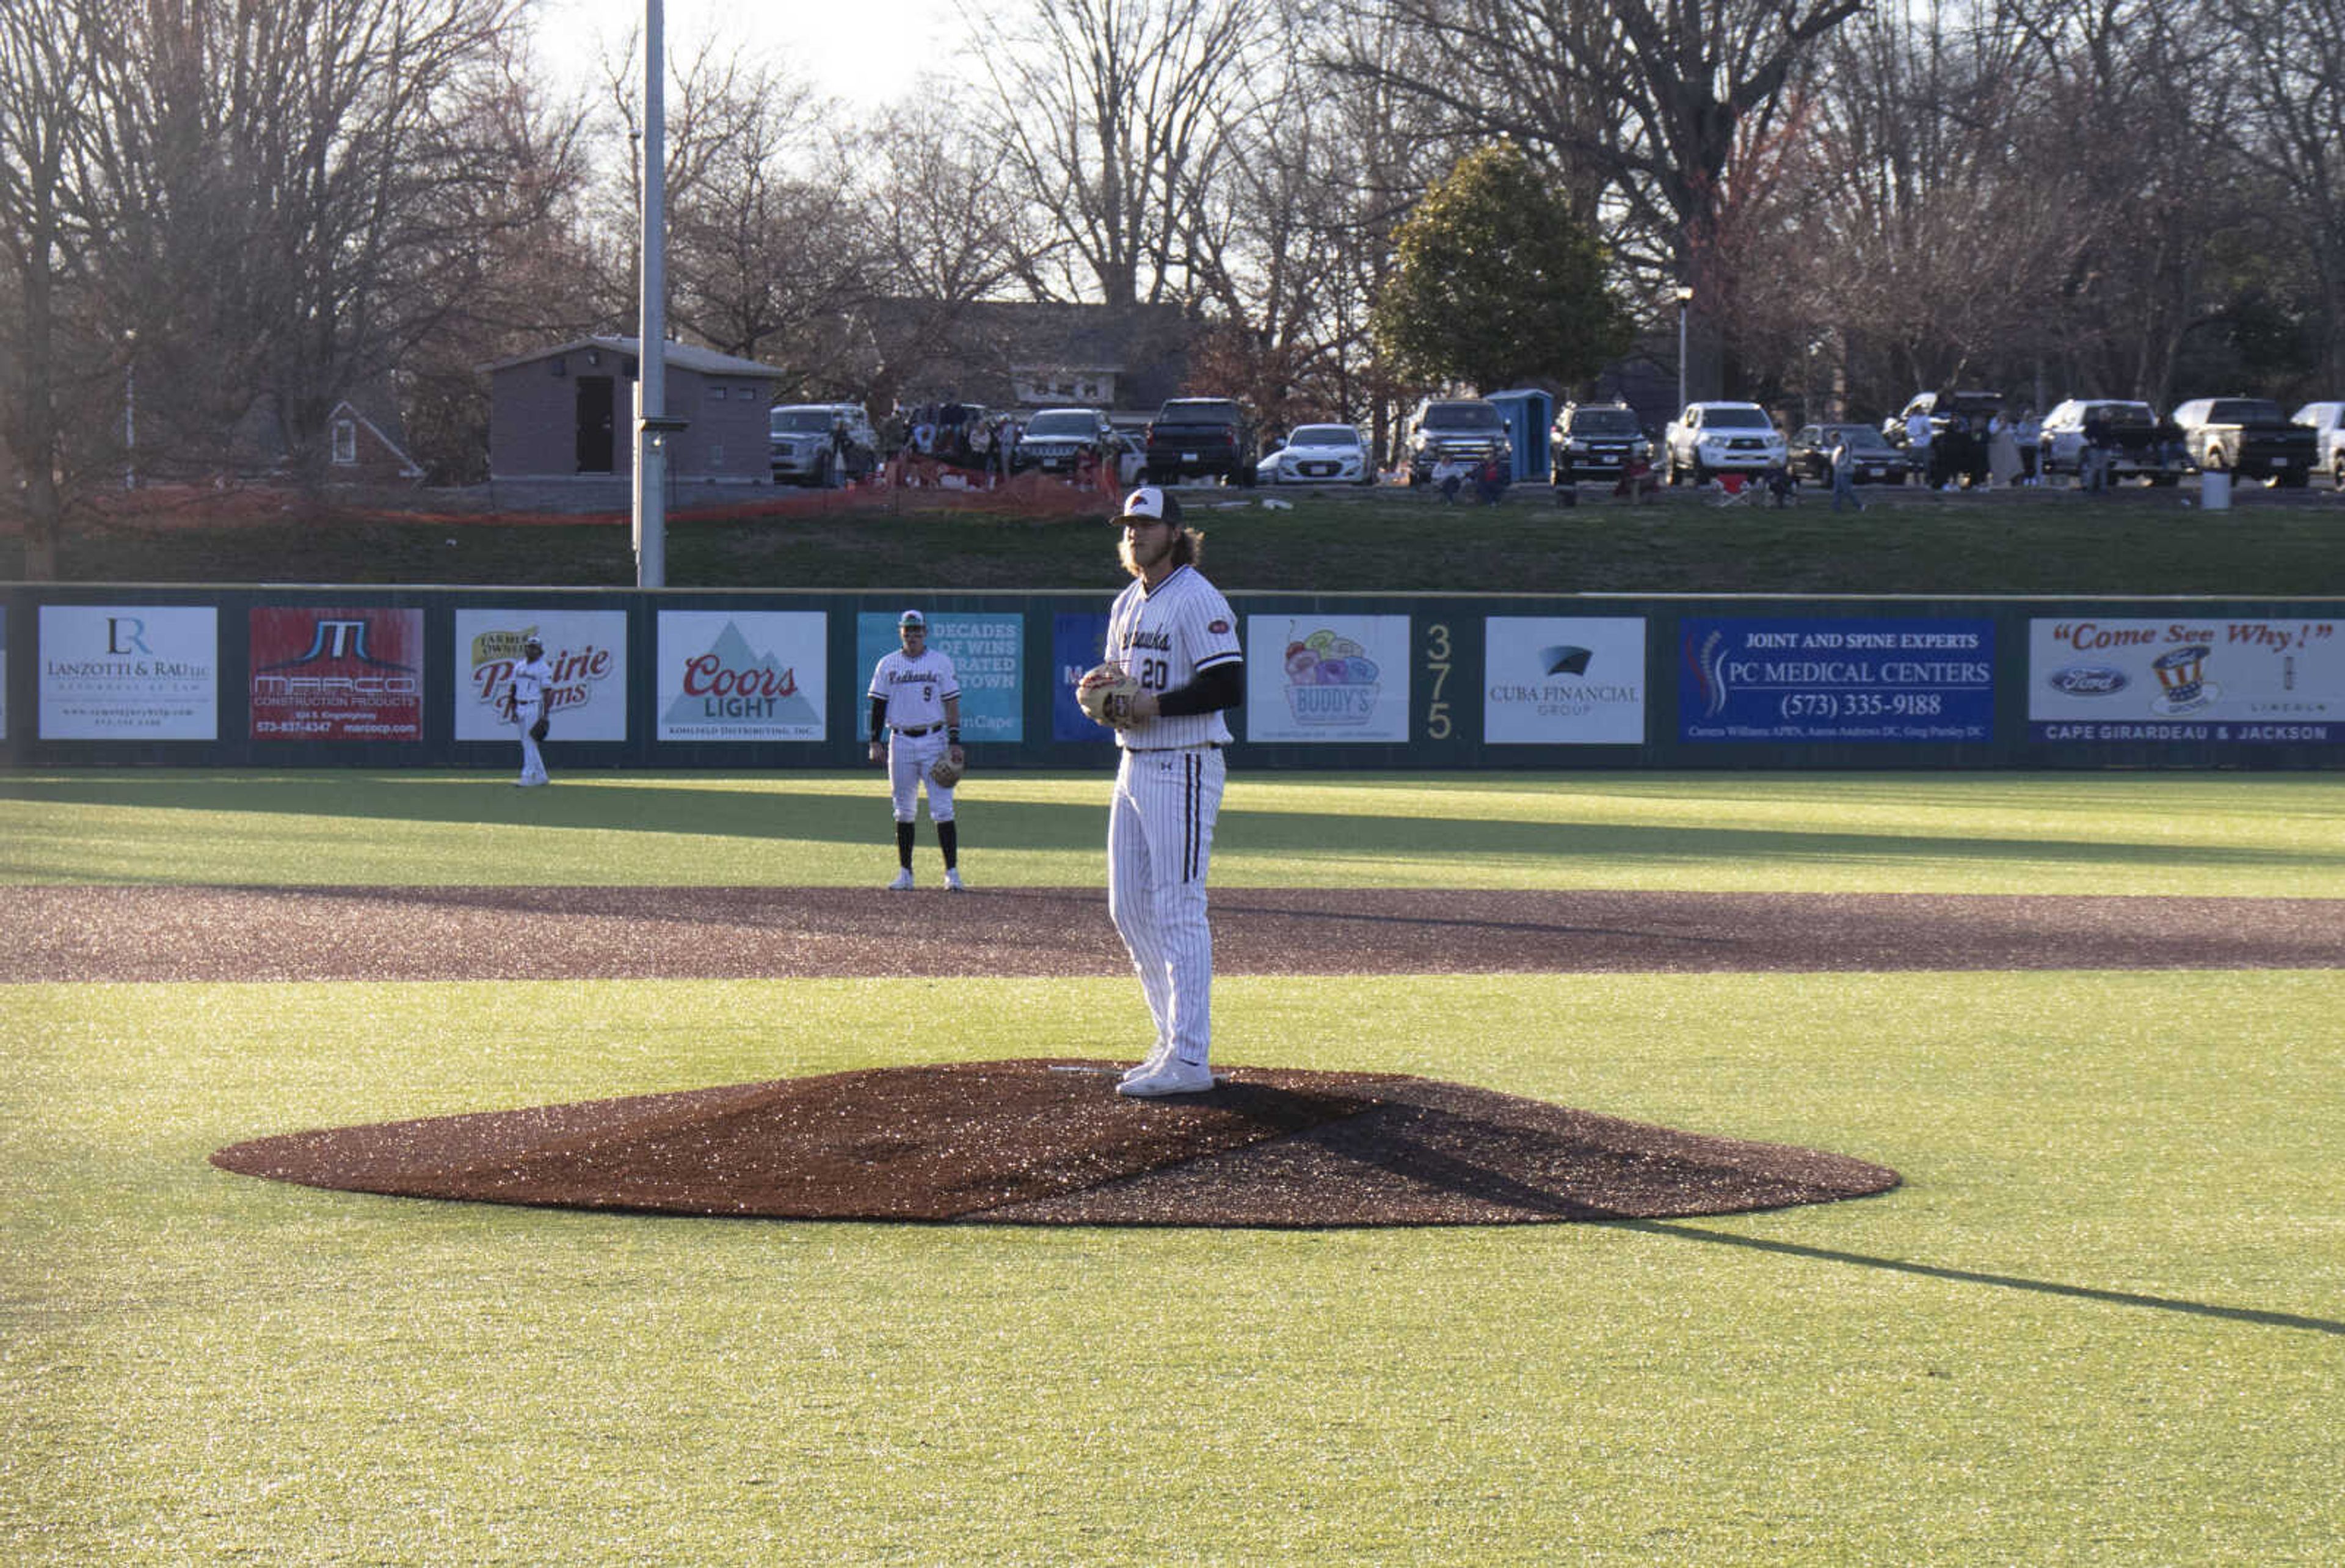 Senior pitcher Jason Rackers gets set to pitch during Southeast's 2-1 win over Southern Illinois University Edwardsville on March 25 at Capaha Field in Cape Girardeau.